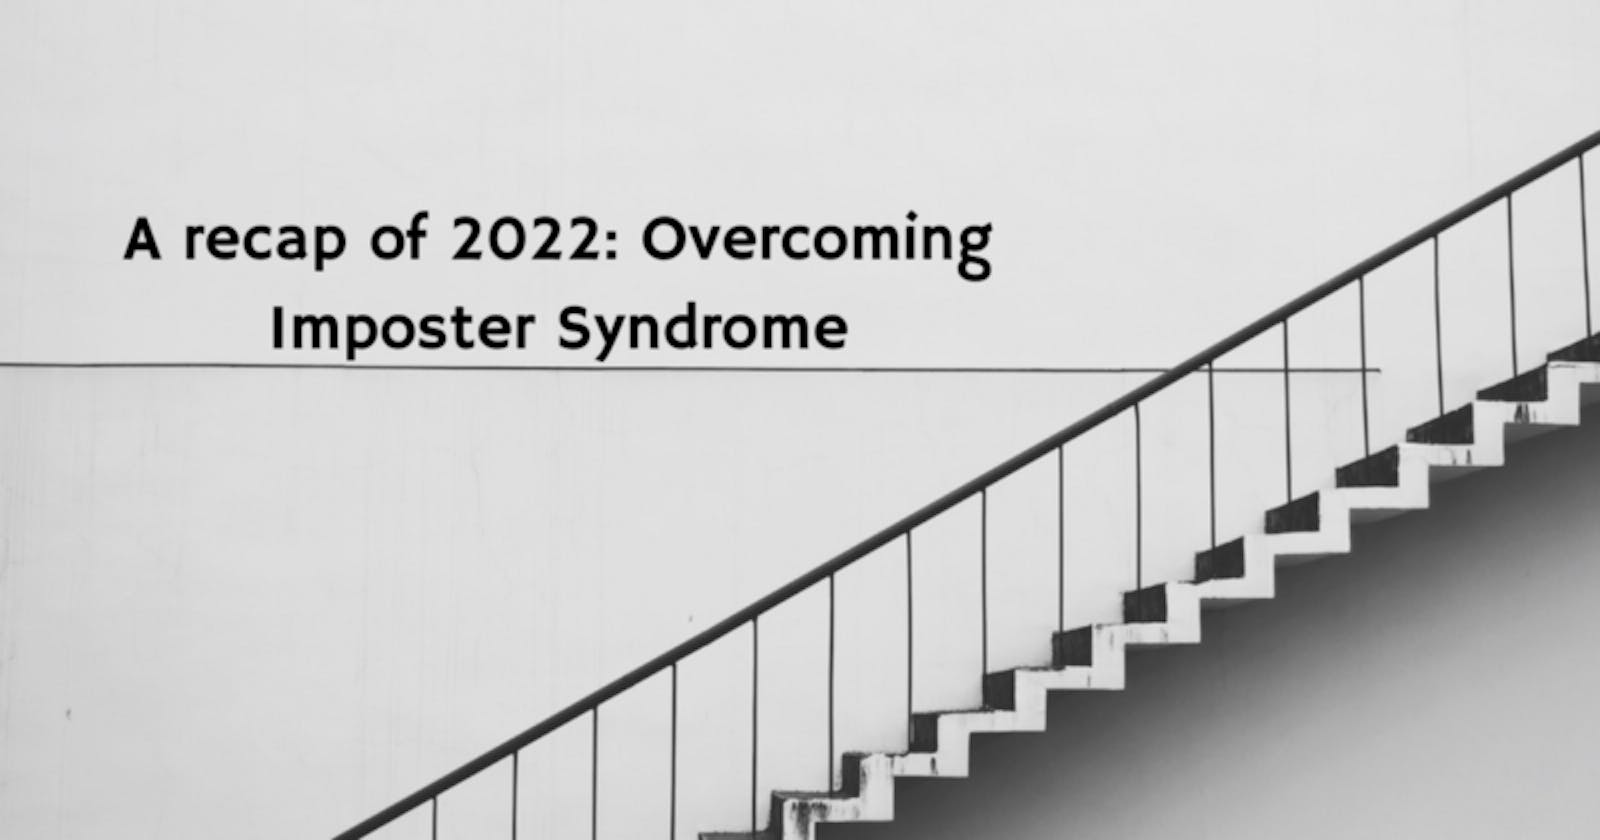 A Recap of 2022: Overcoming Imposter Syndrome